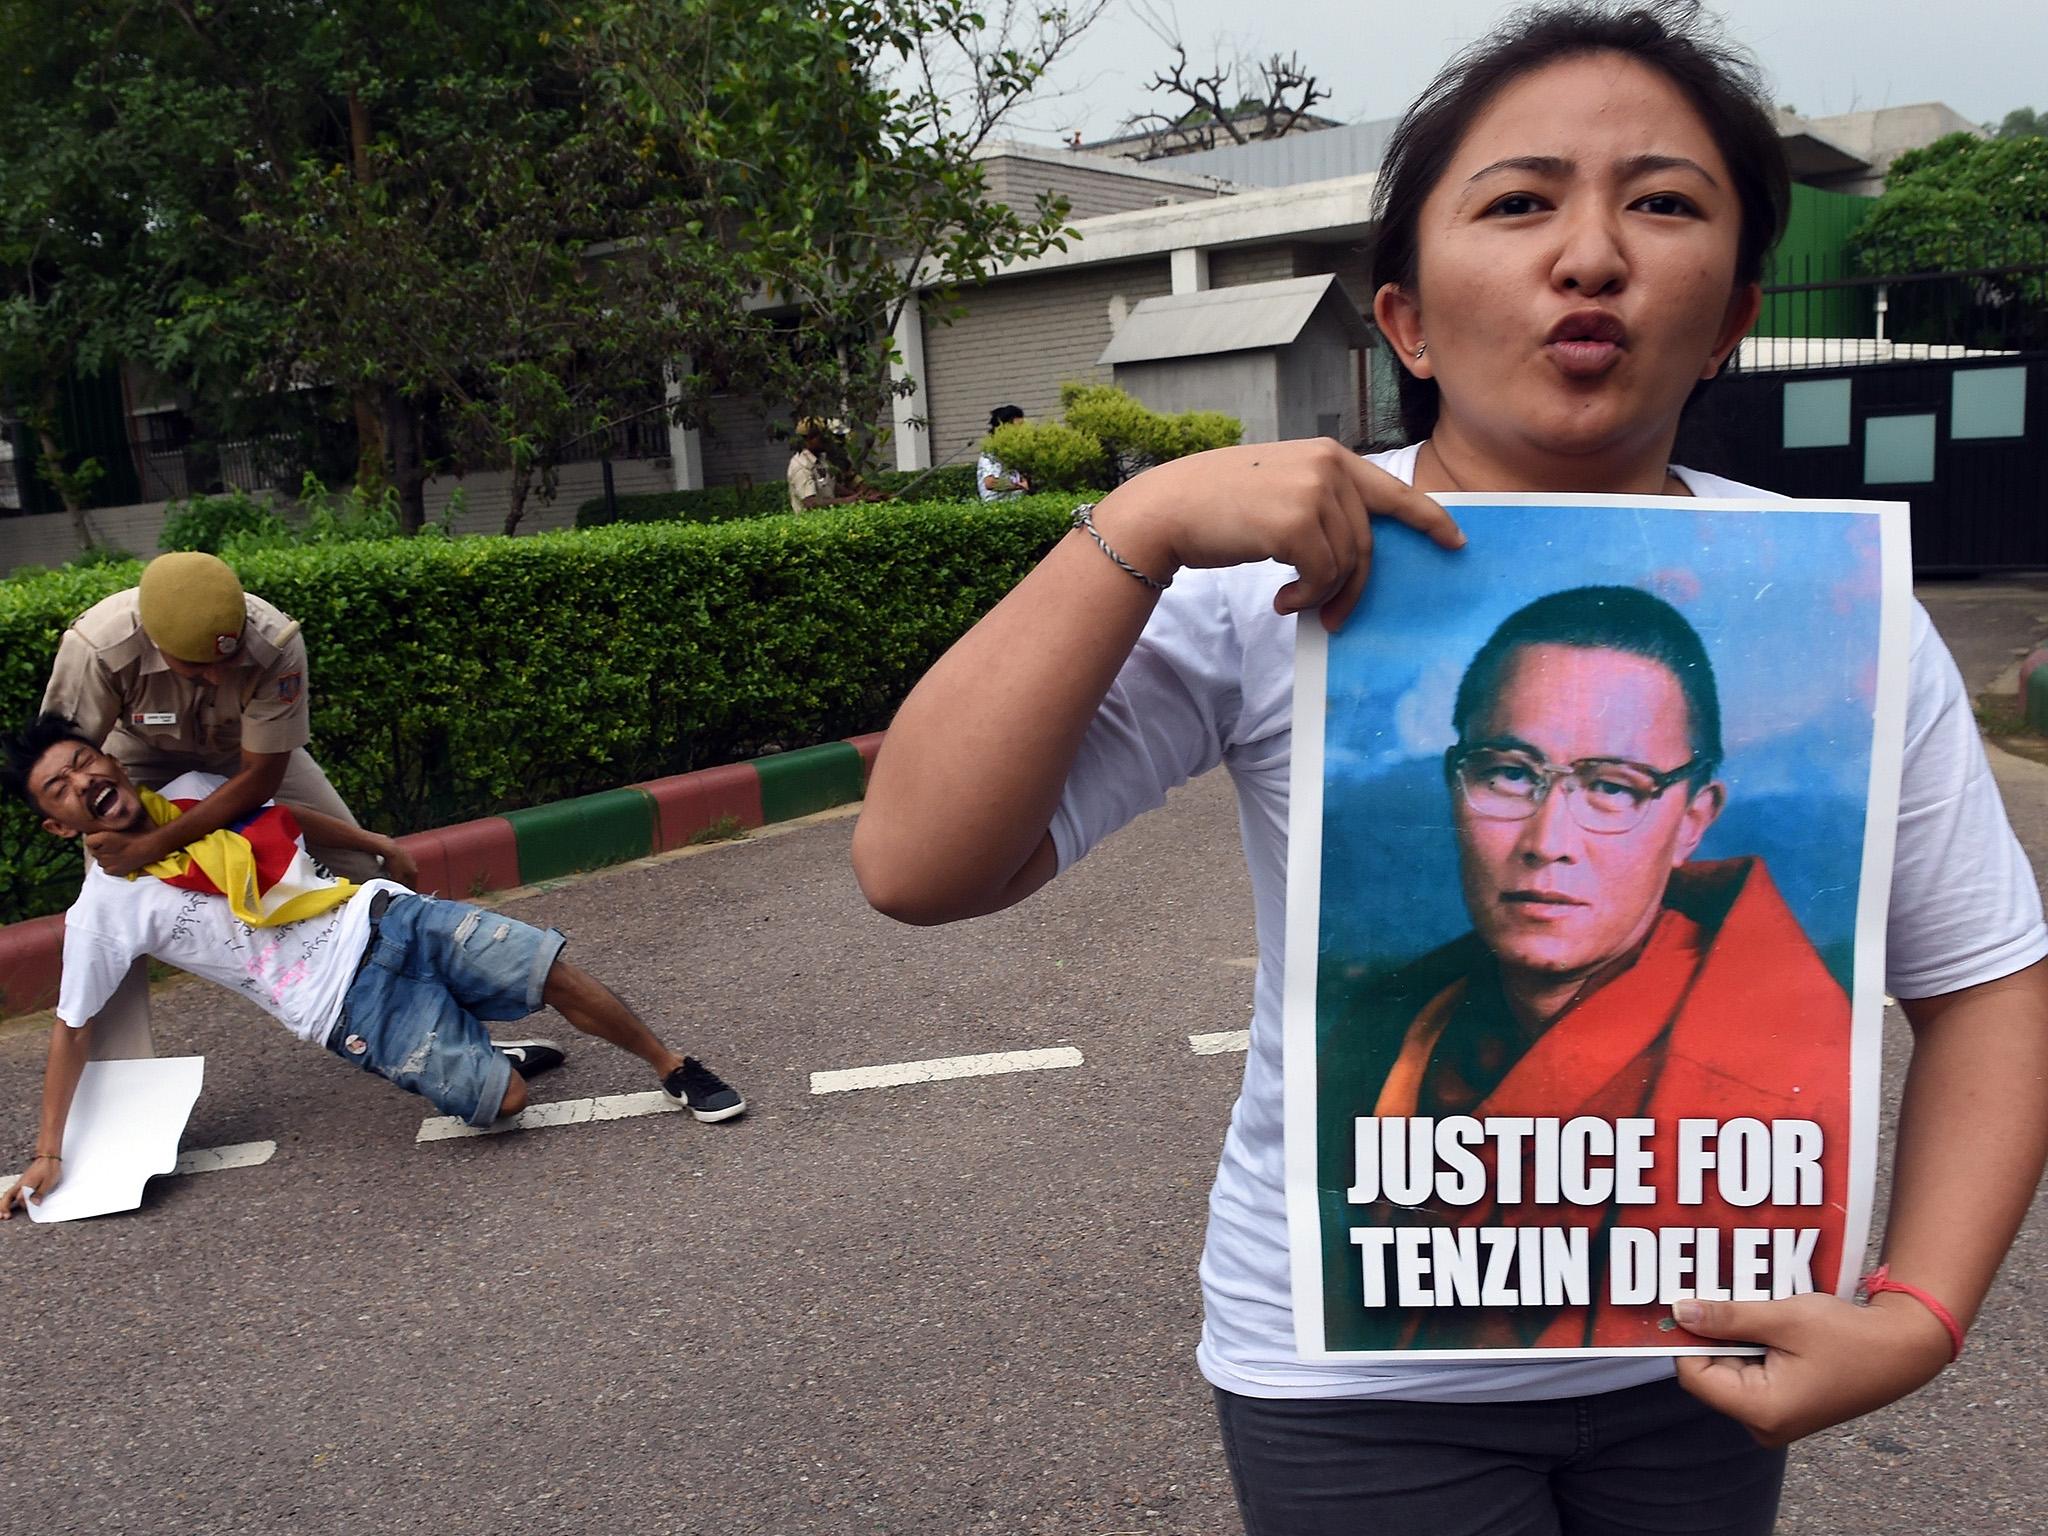 Protesters in India are arguing that the Buddhist monk was killed by prison guards